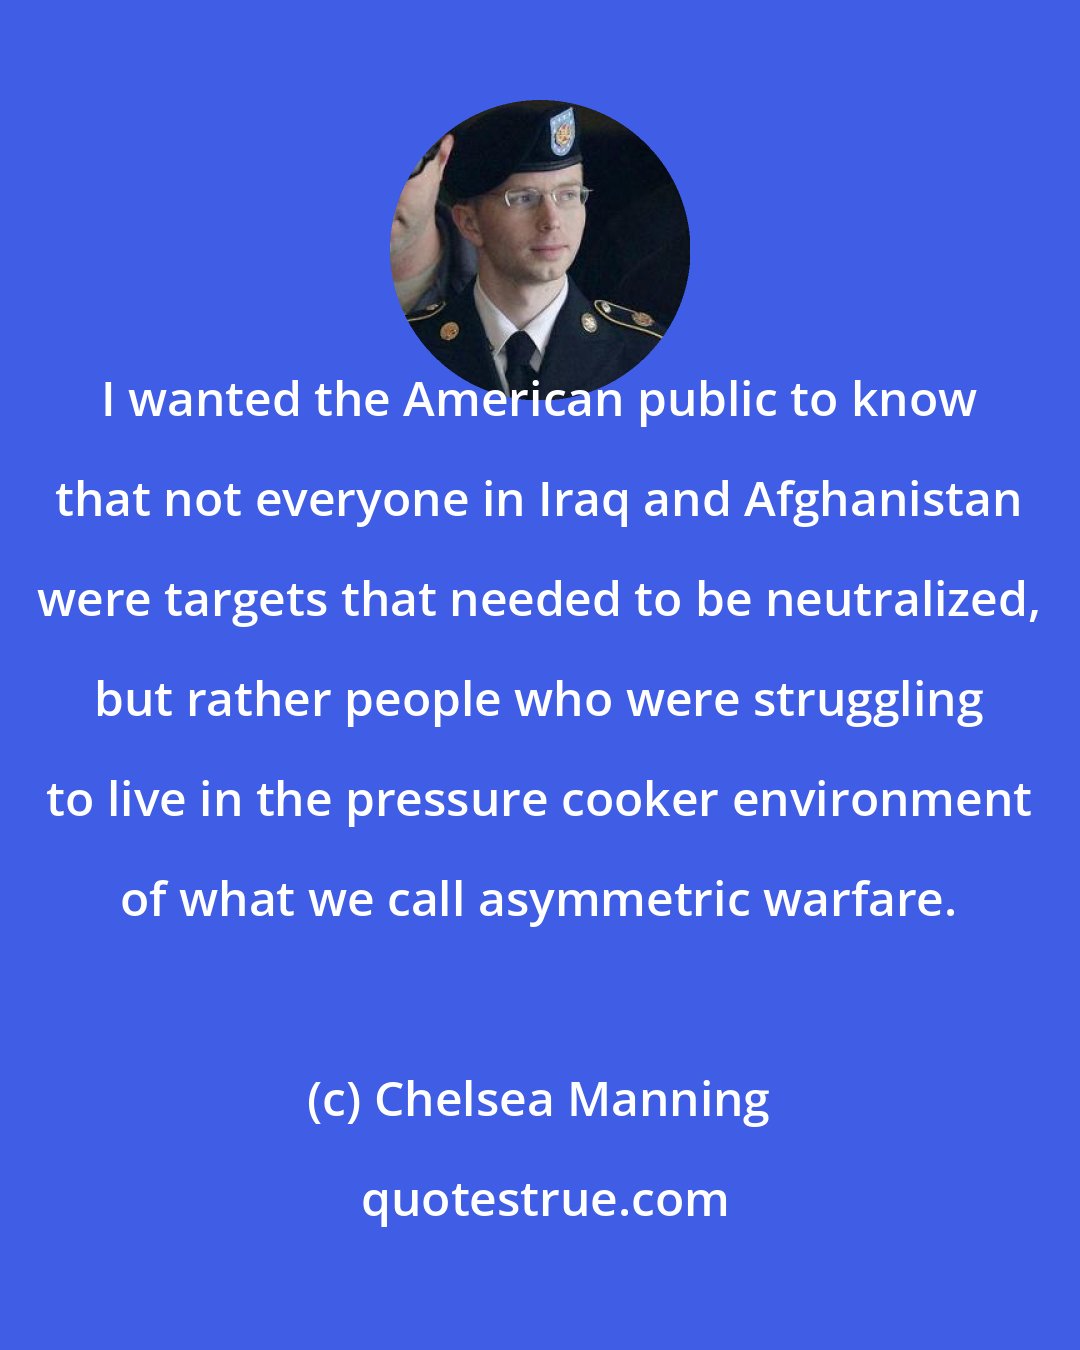 Chelsea Manning: I wanted the American public to know that not everyone in Iraq and Afghanistan were targets that needed to be neutralized, but rather people who were struggling to live in the pressure cooker environment of what we call asymmetric warfare.